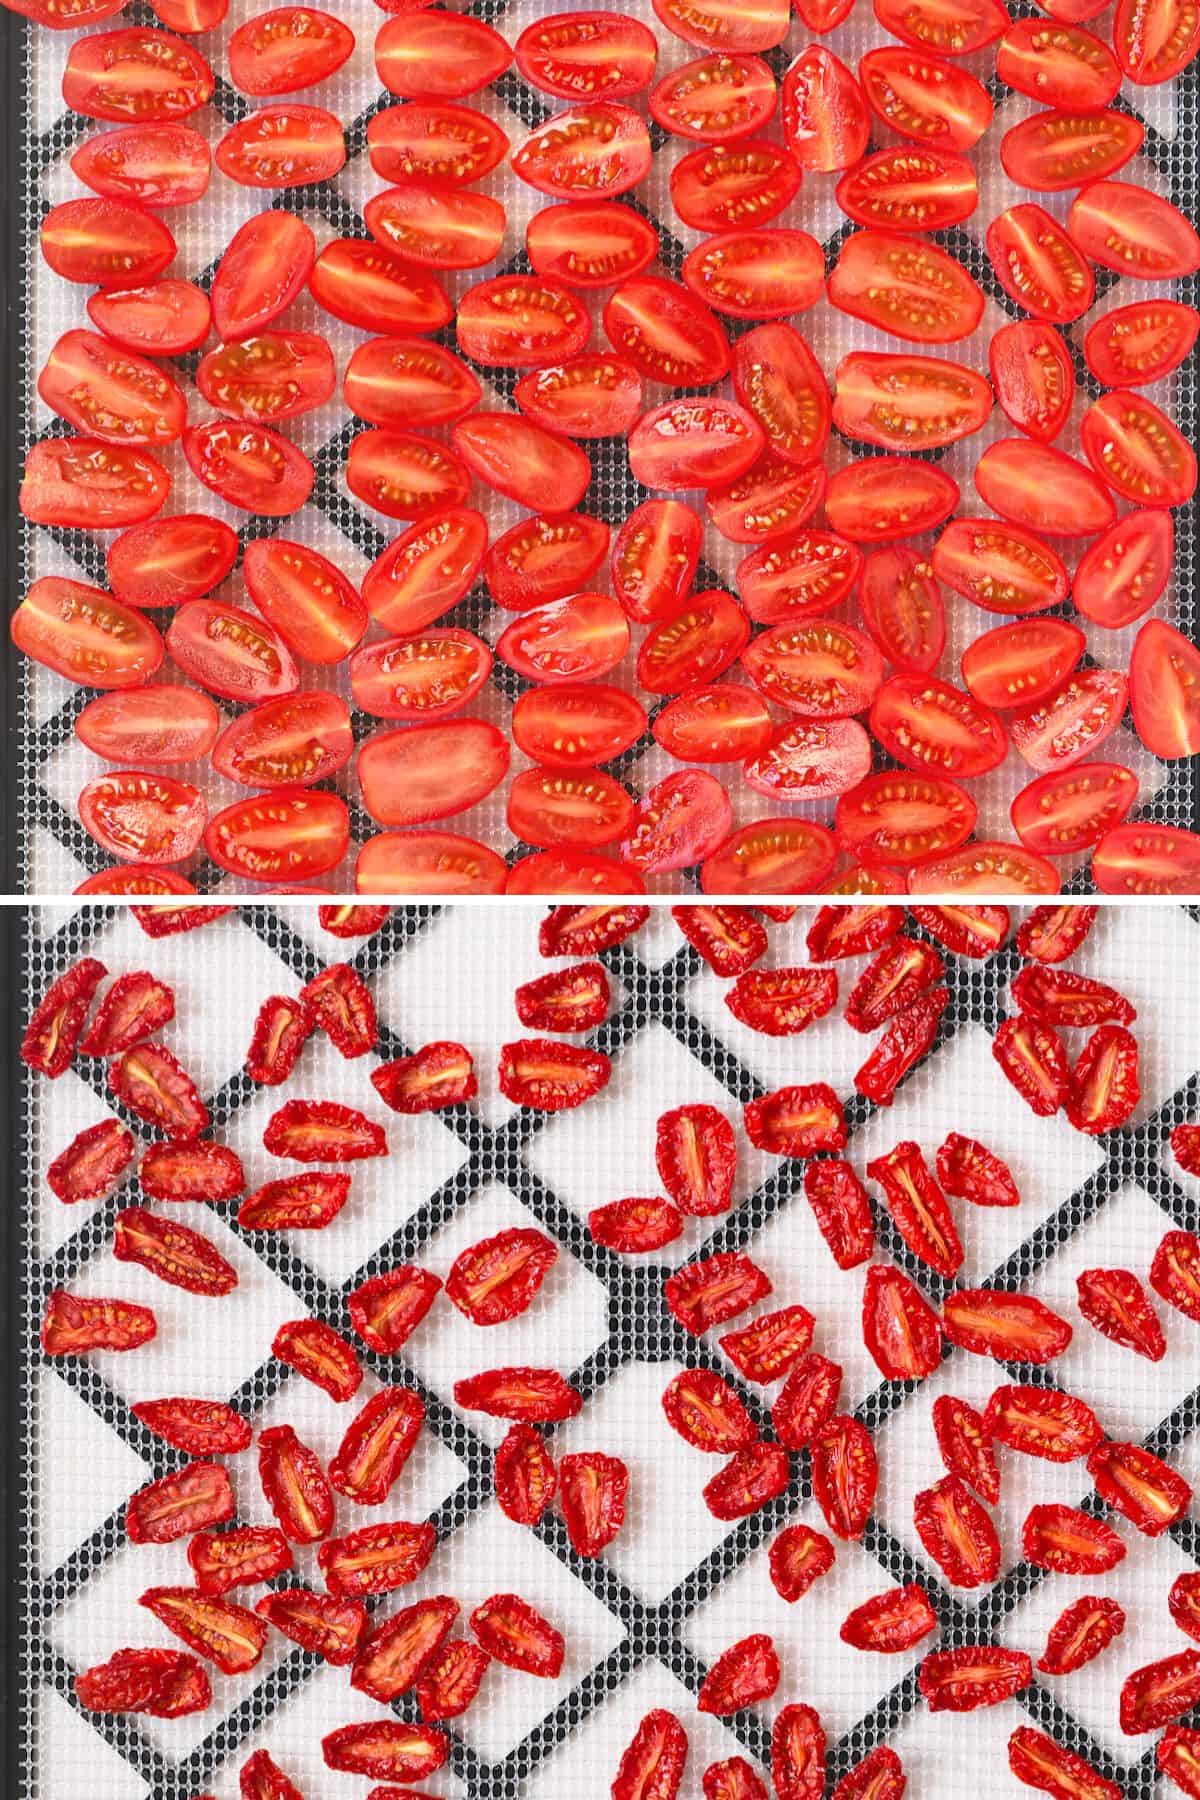 Before and after dehydrating tomatoes